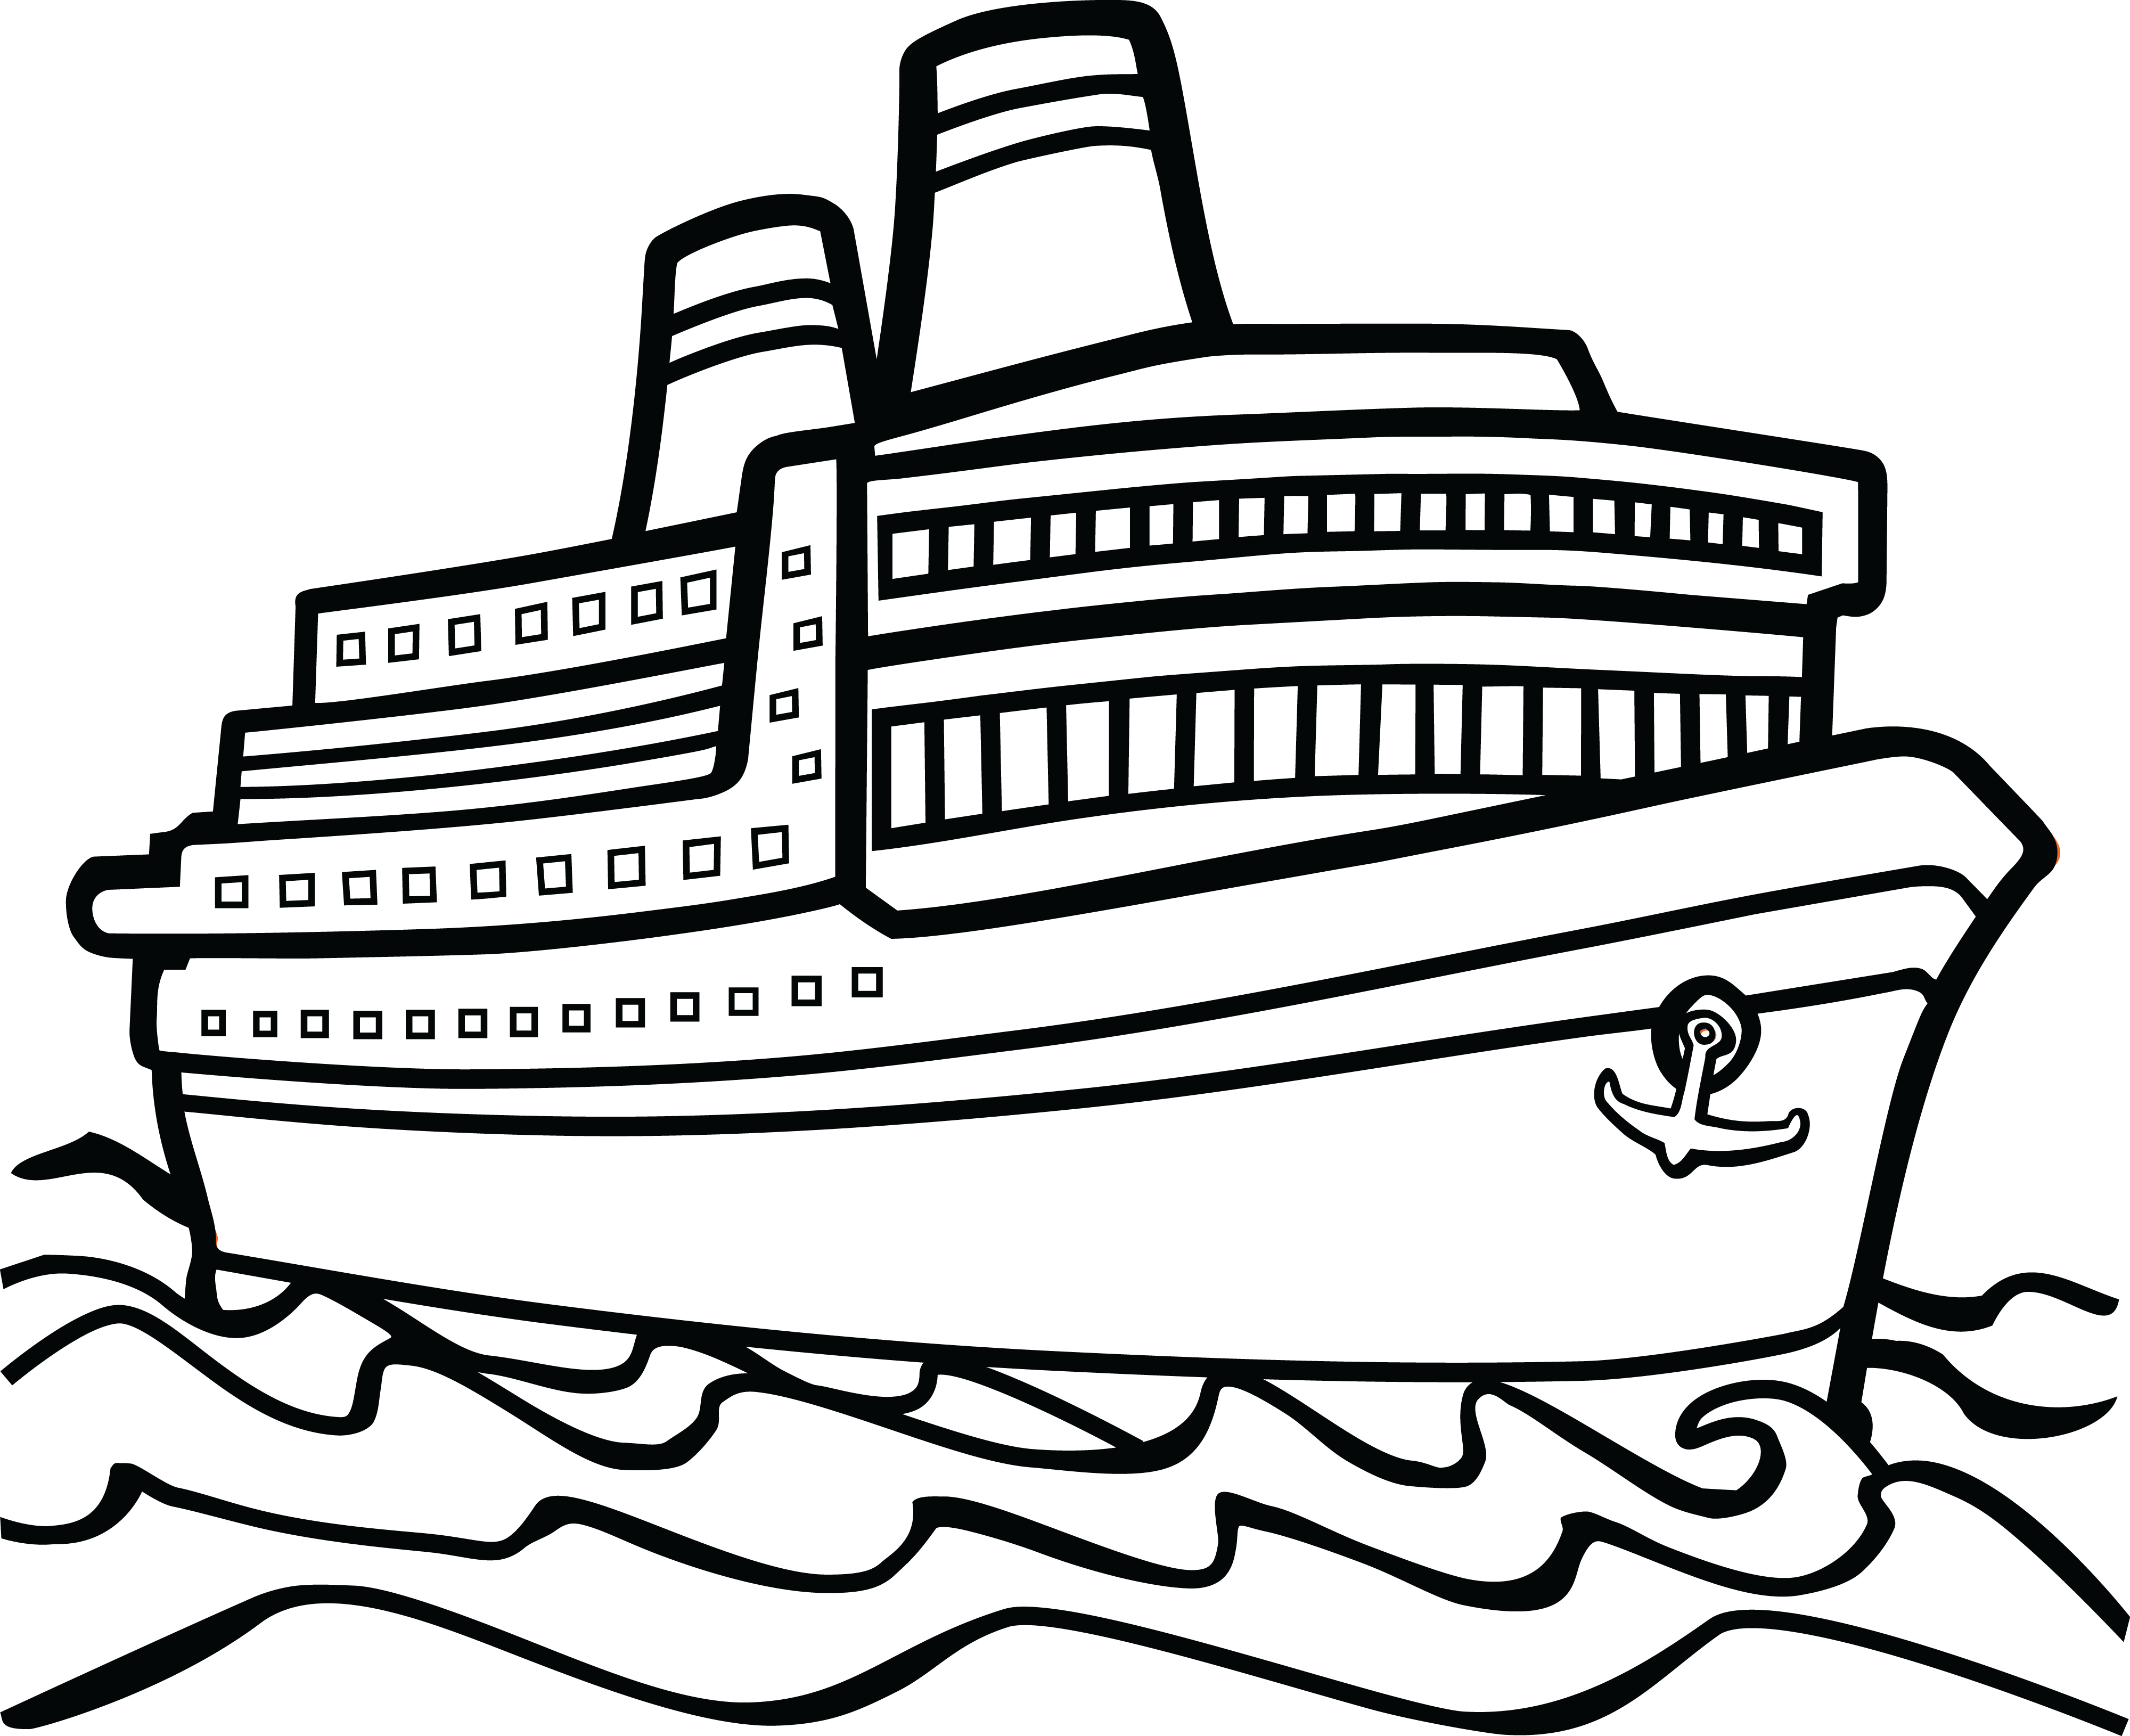 Free Clipart Of A cruise boat #00011422 .